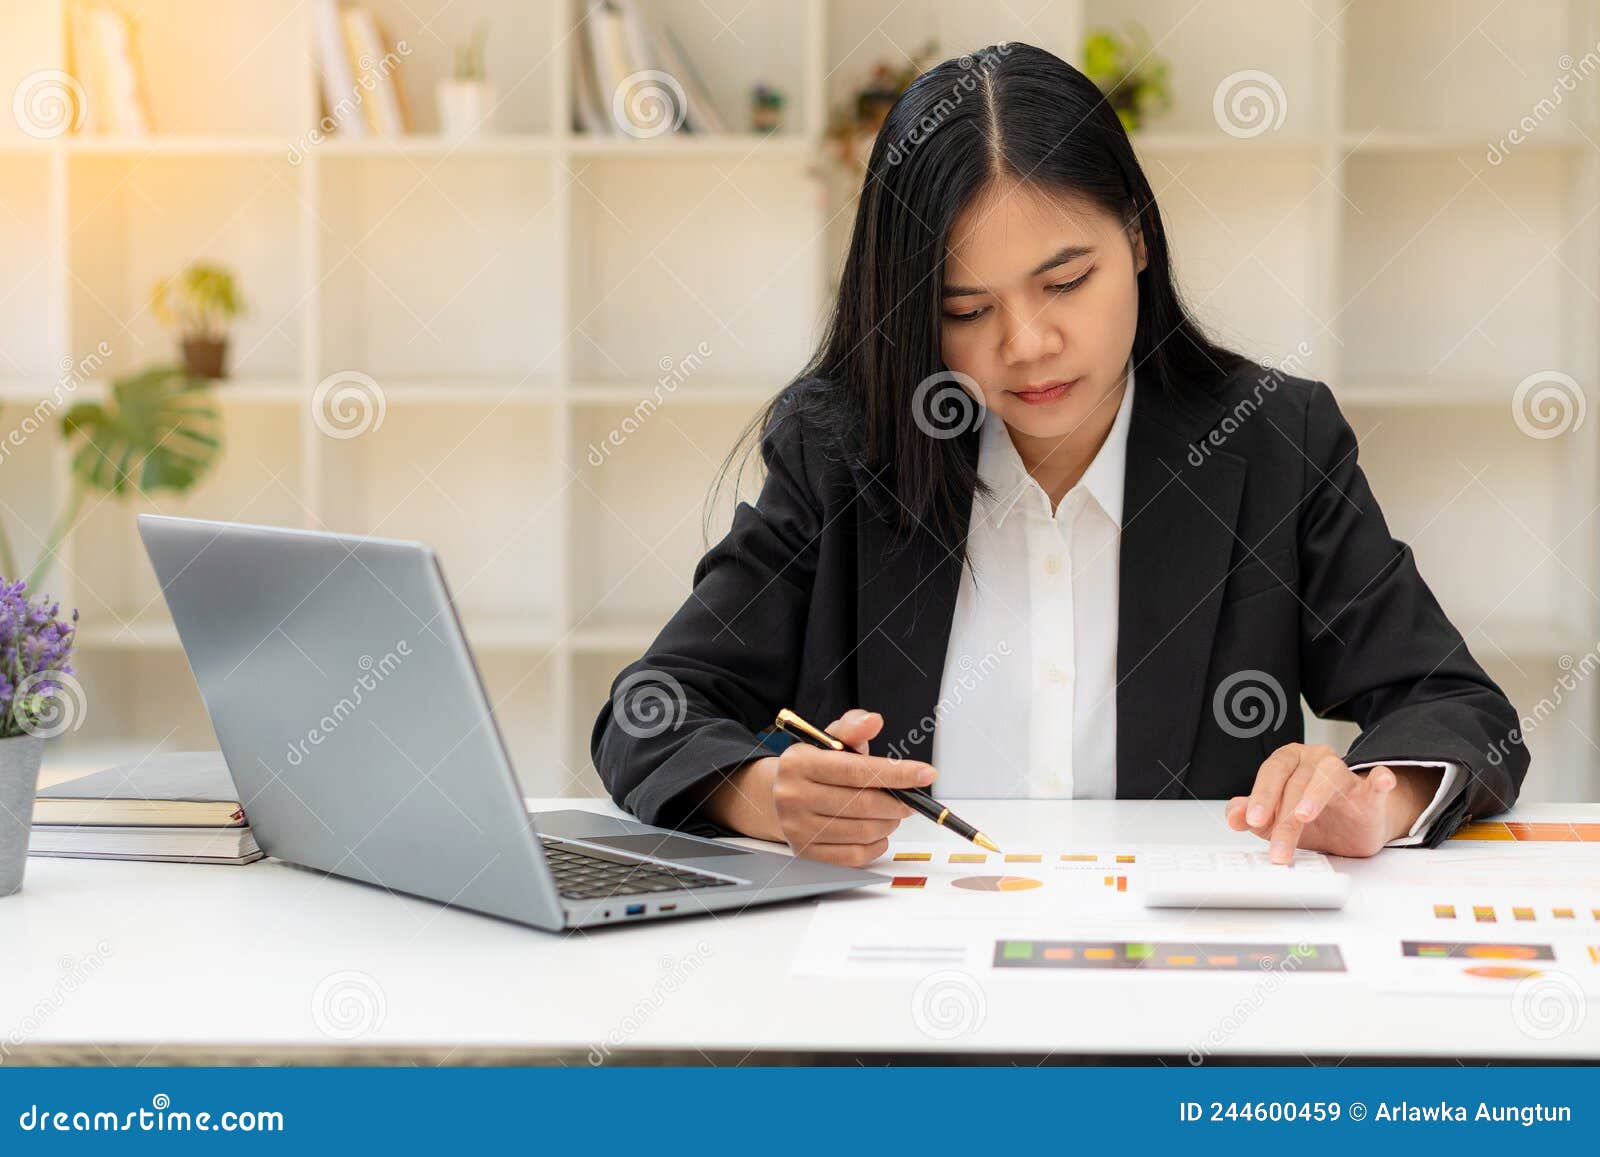 Asian Female Accountant Or Banker Calculating Savings Finance And Economy Concepts Via Laptop